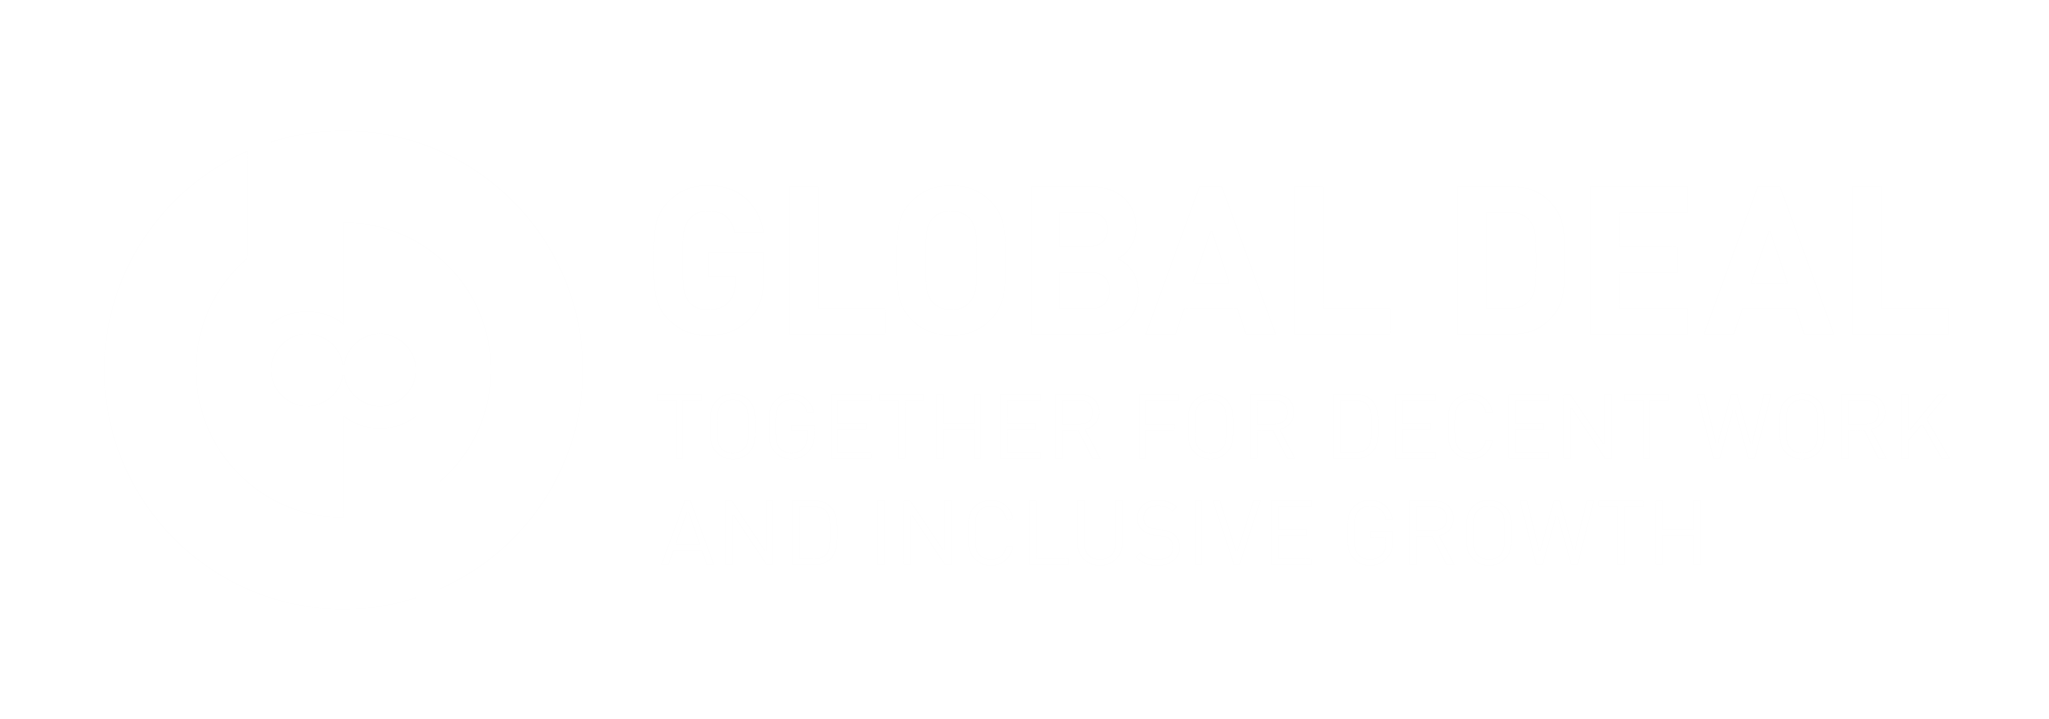 Global Deal conference - A Better Future for Essential Workers